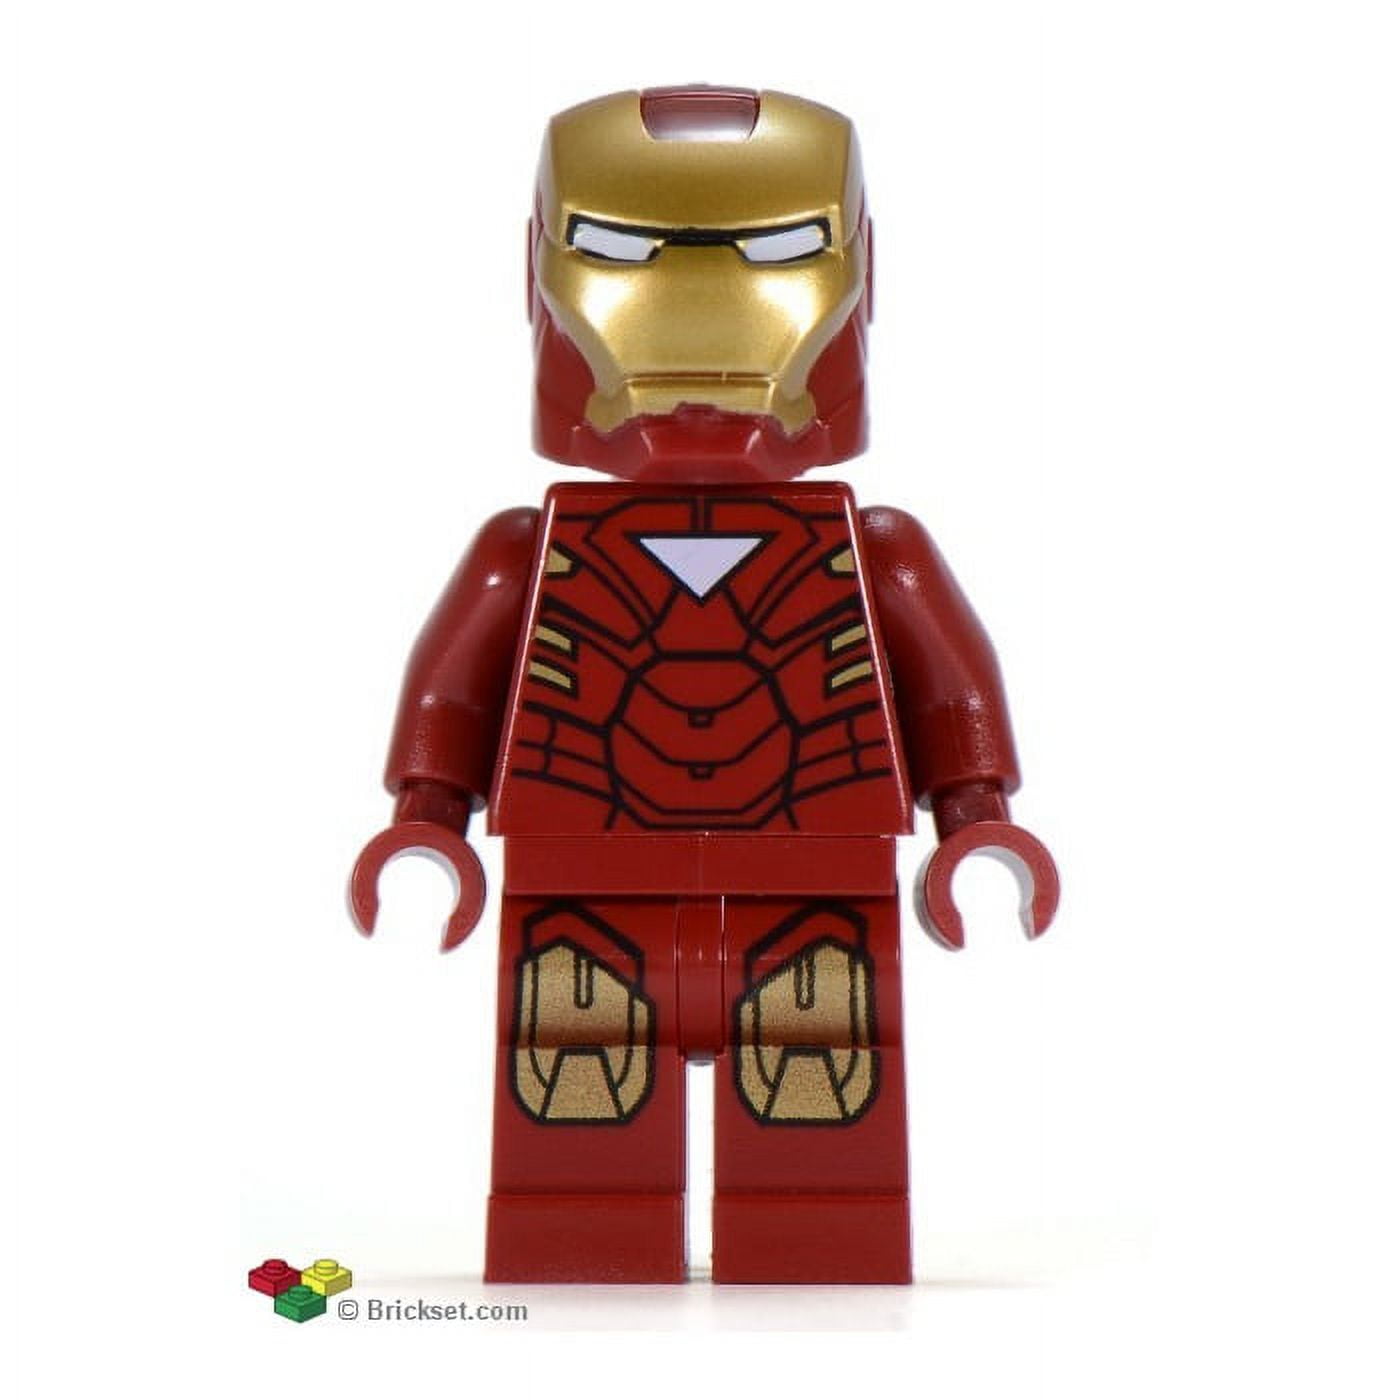  LEGO Marvel Super Heroes Minifigure - Iron Man with Triangle on  Chest : Toys & Games